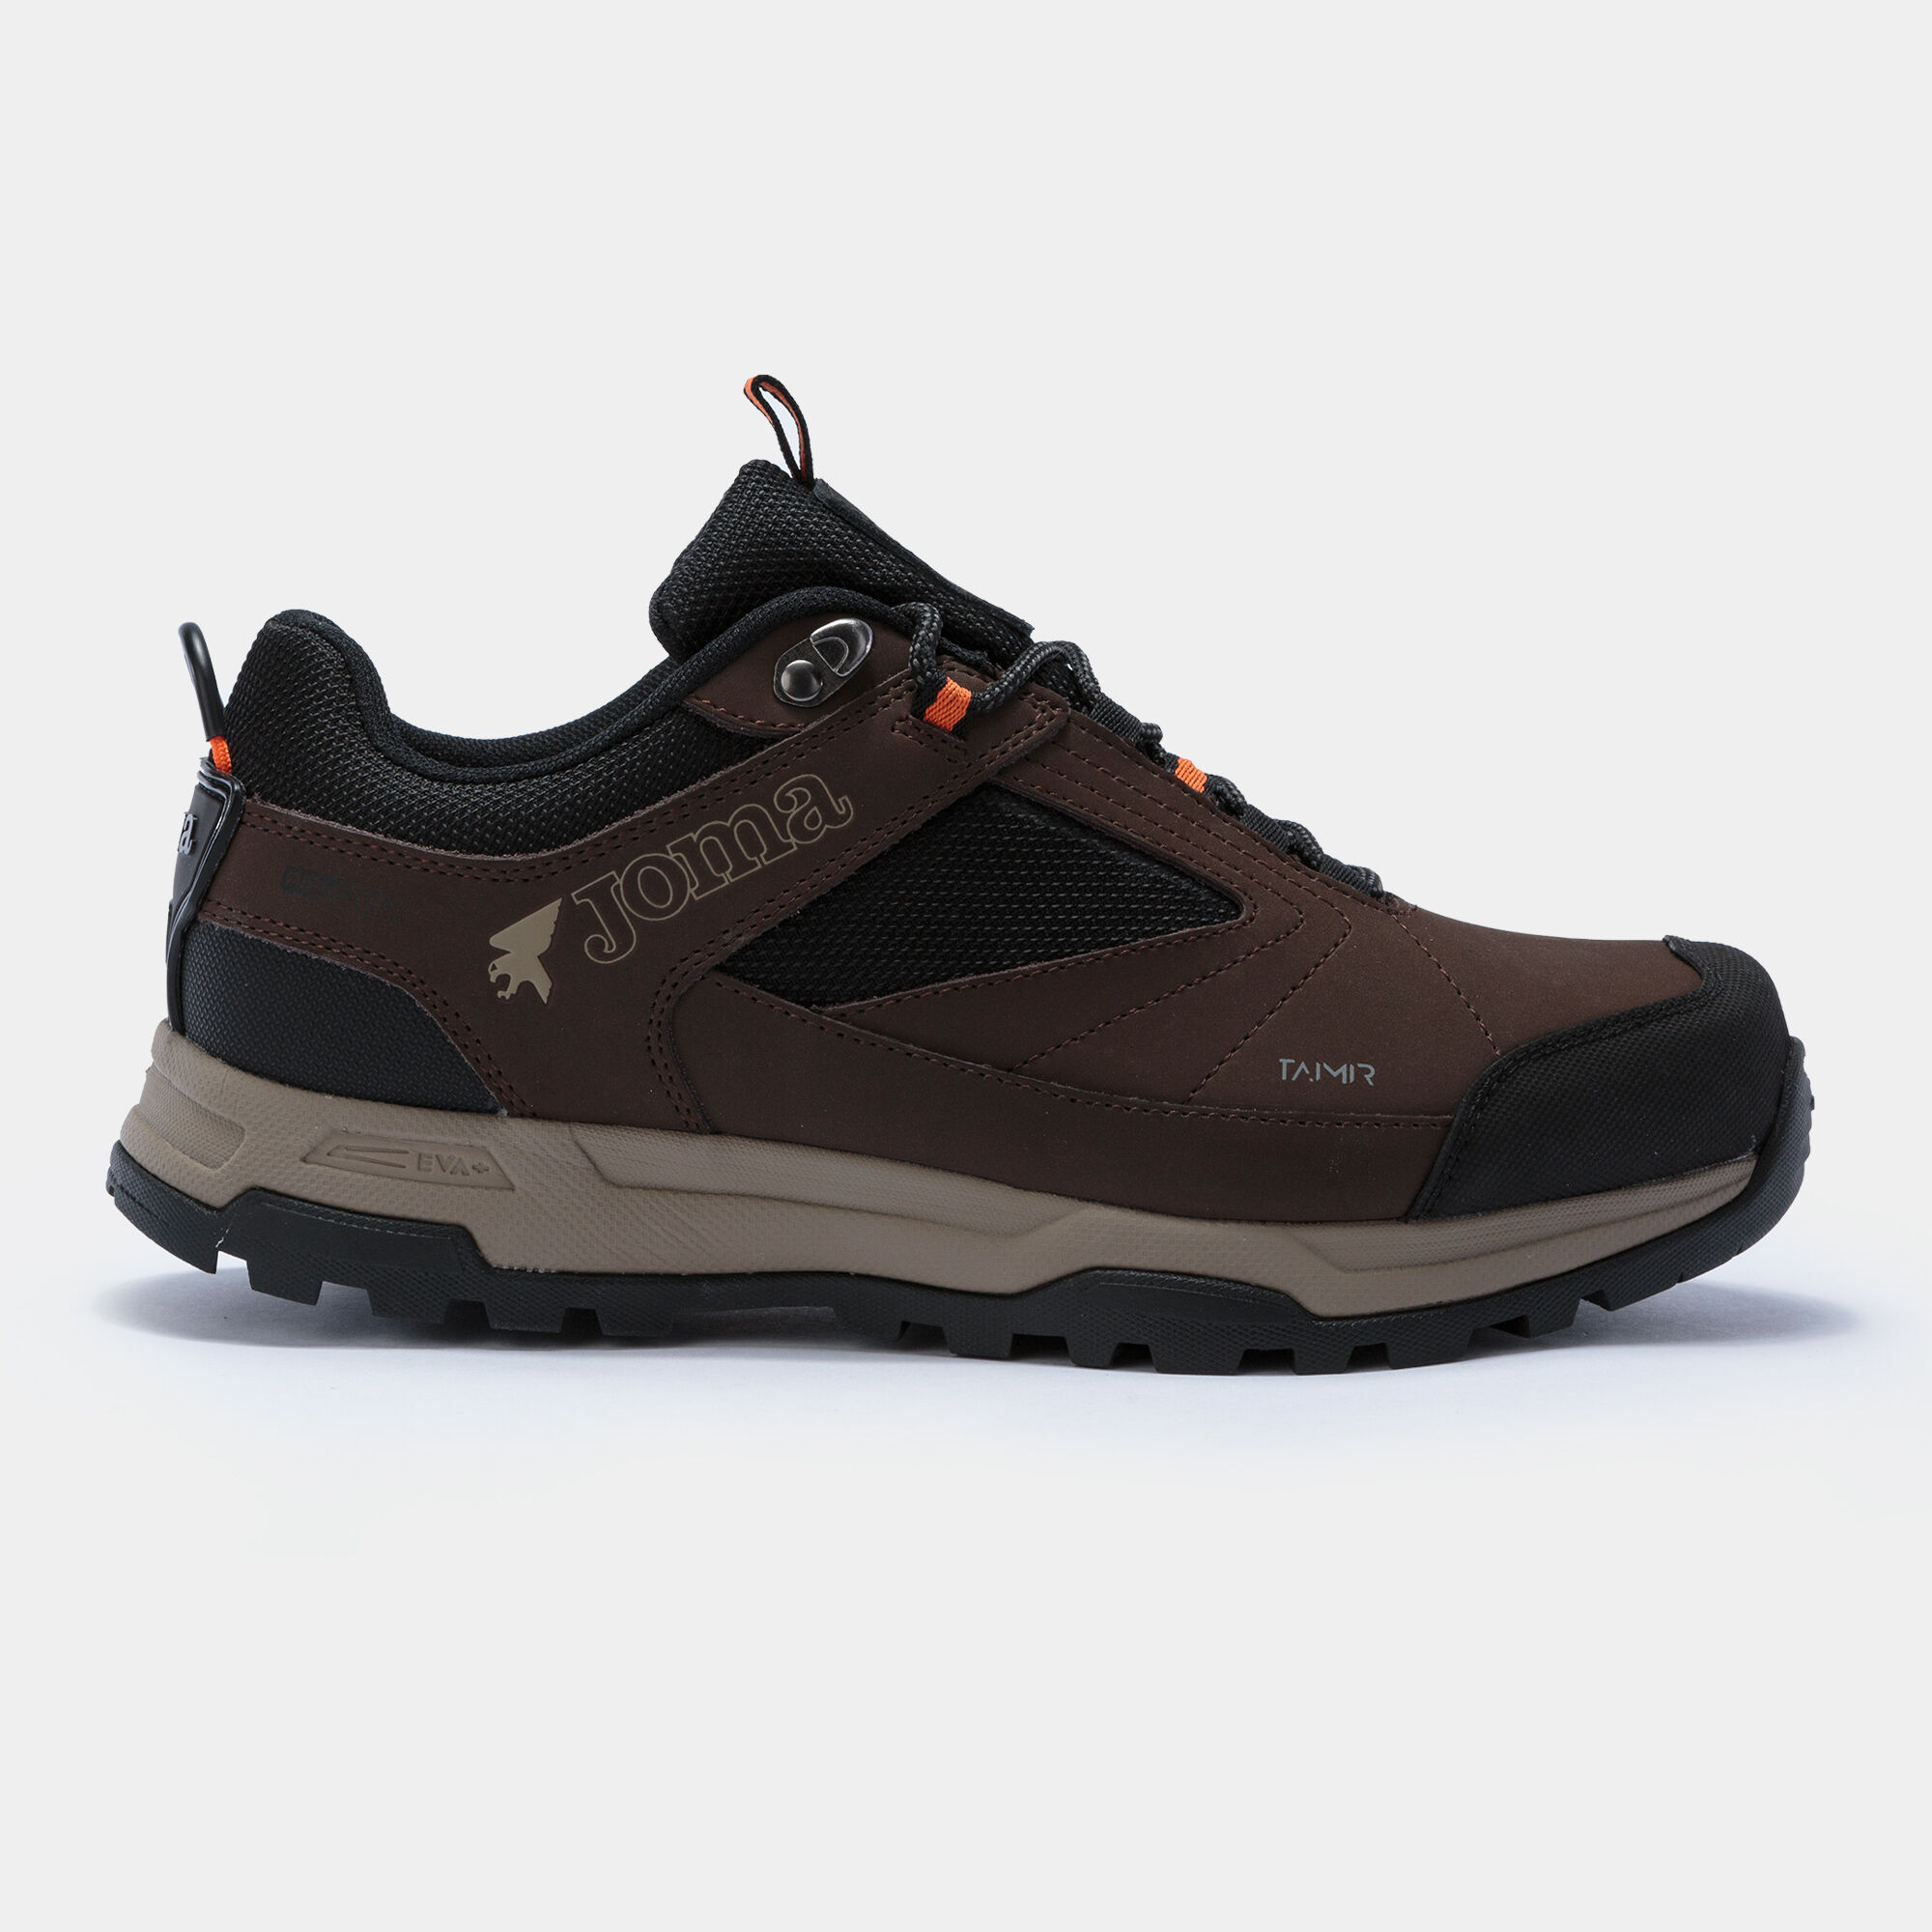 CHAUSSURES OUTDOOR TAIMIR 22 HOMME MARRON